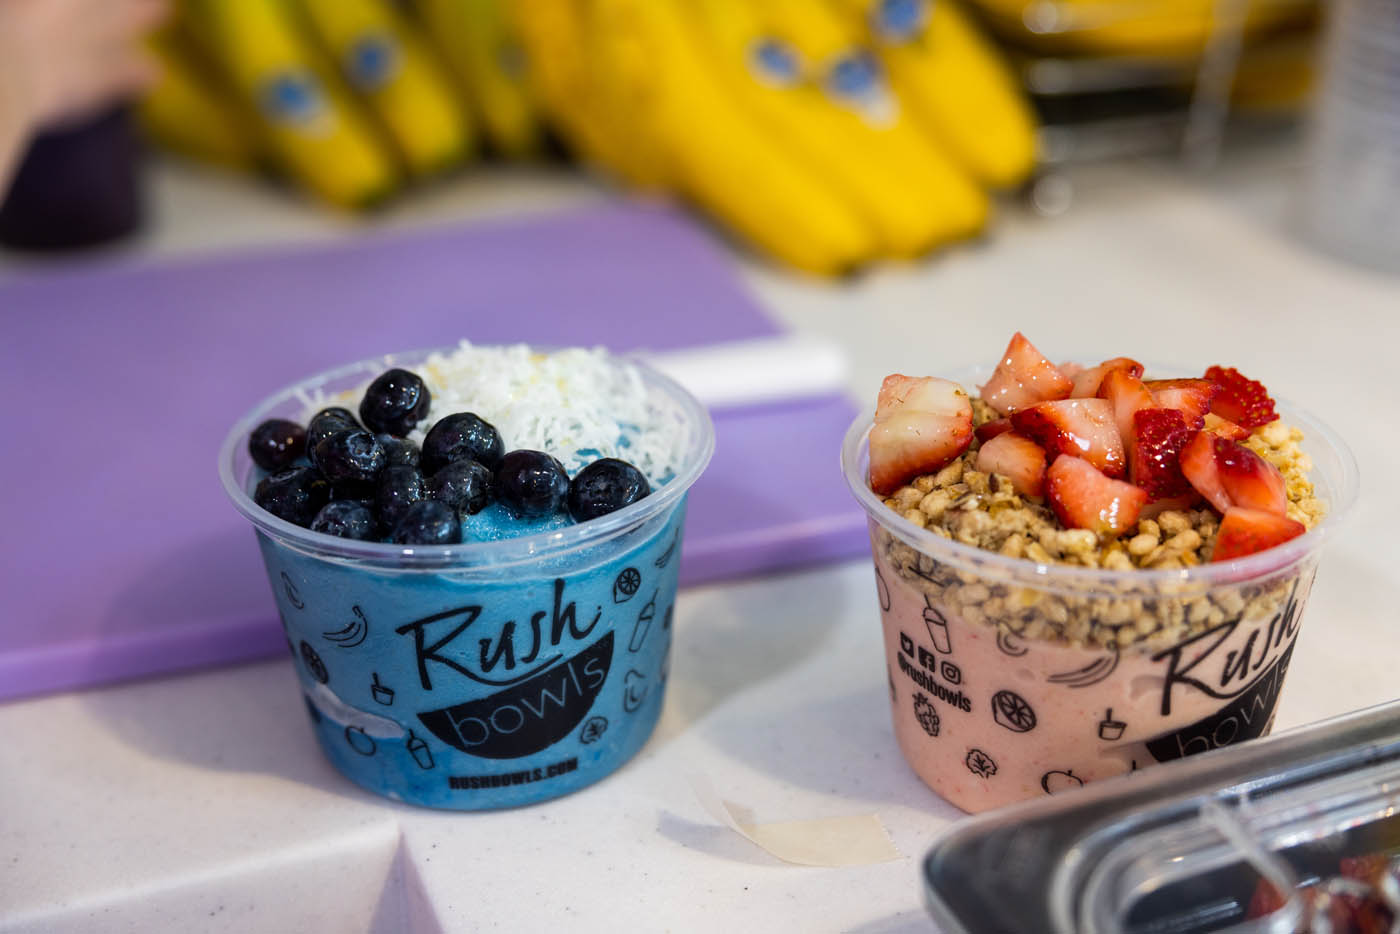 Rush Bowls's franchising benefits of self-employment are countless.